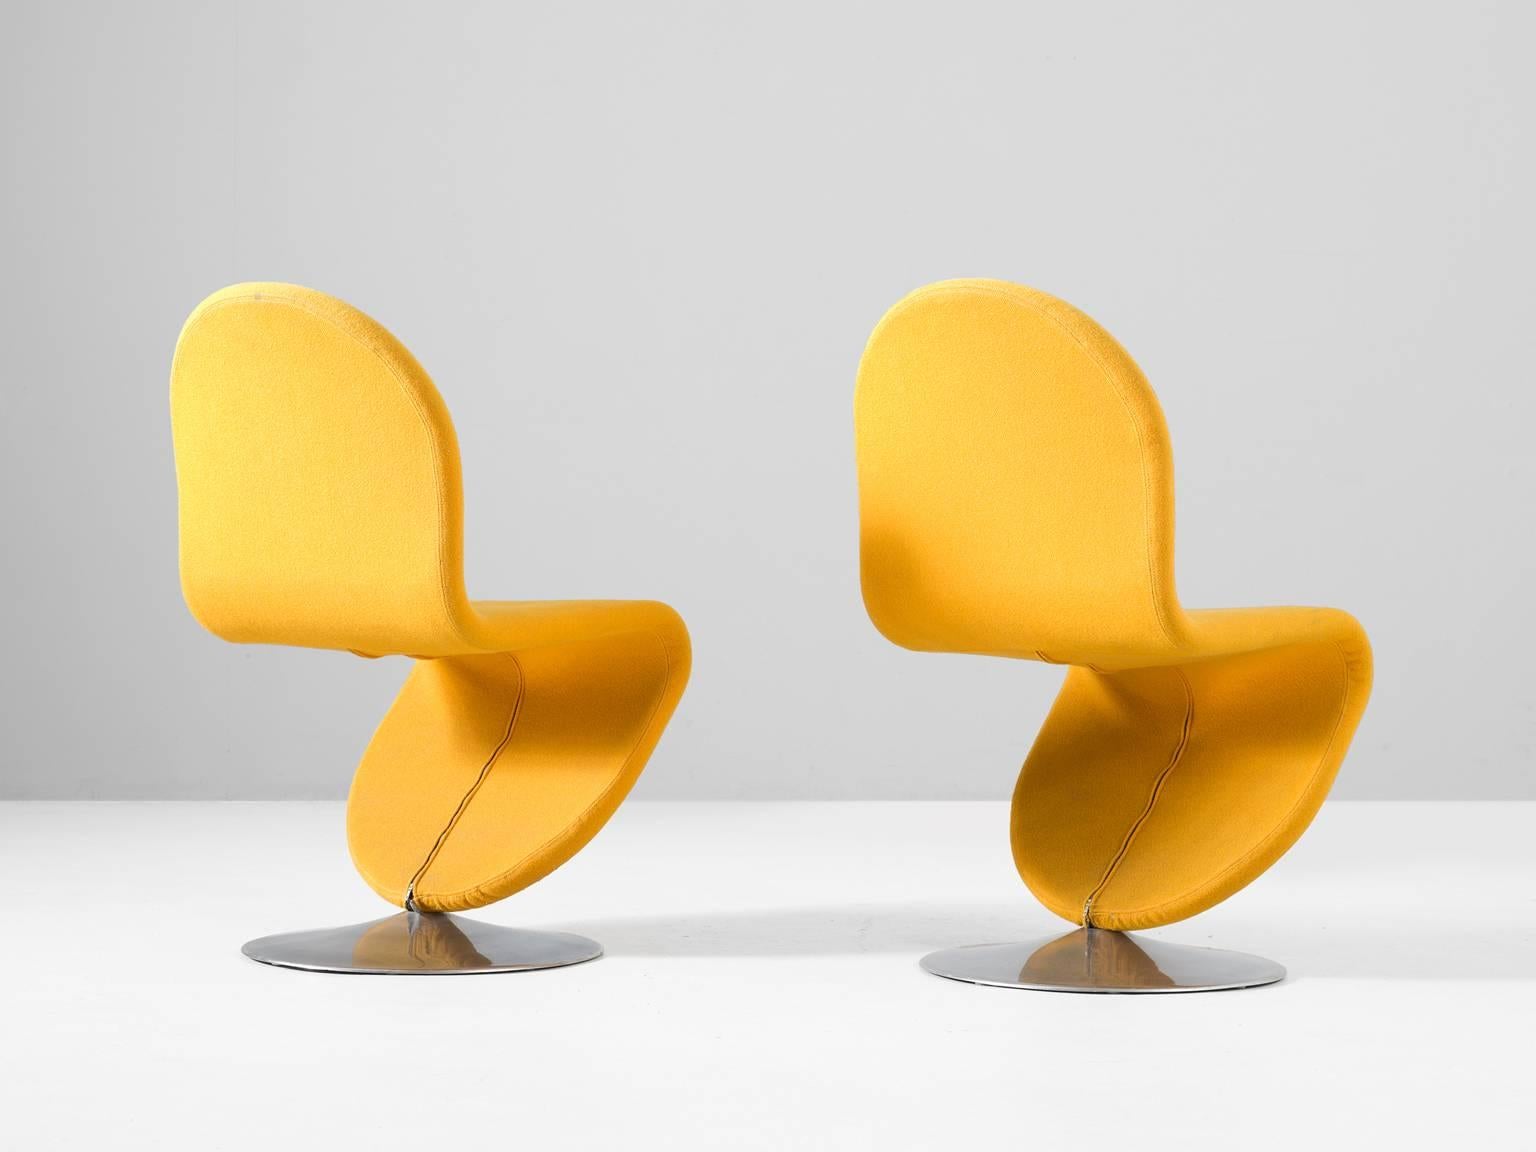 Verner Panton Set of Eight Chairs from the 1-2-3 Series for Fritz Hansen 1